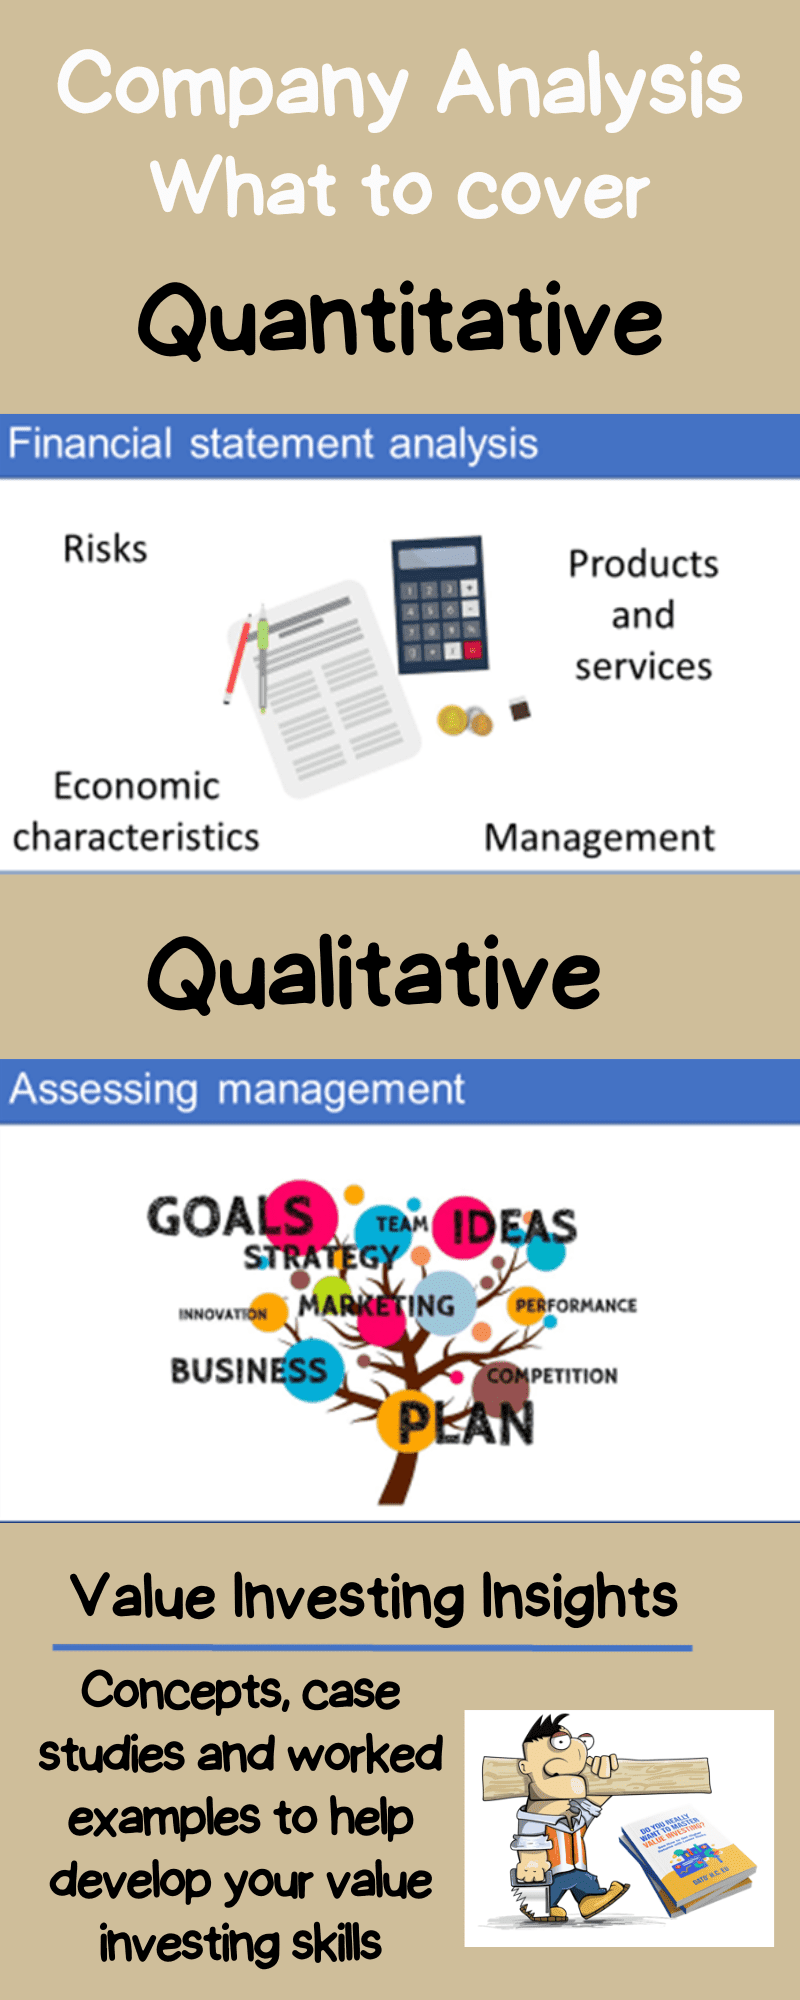 What is covered under the qualitative and quantitative aspects?